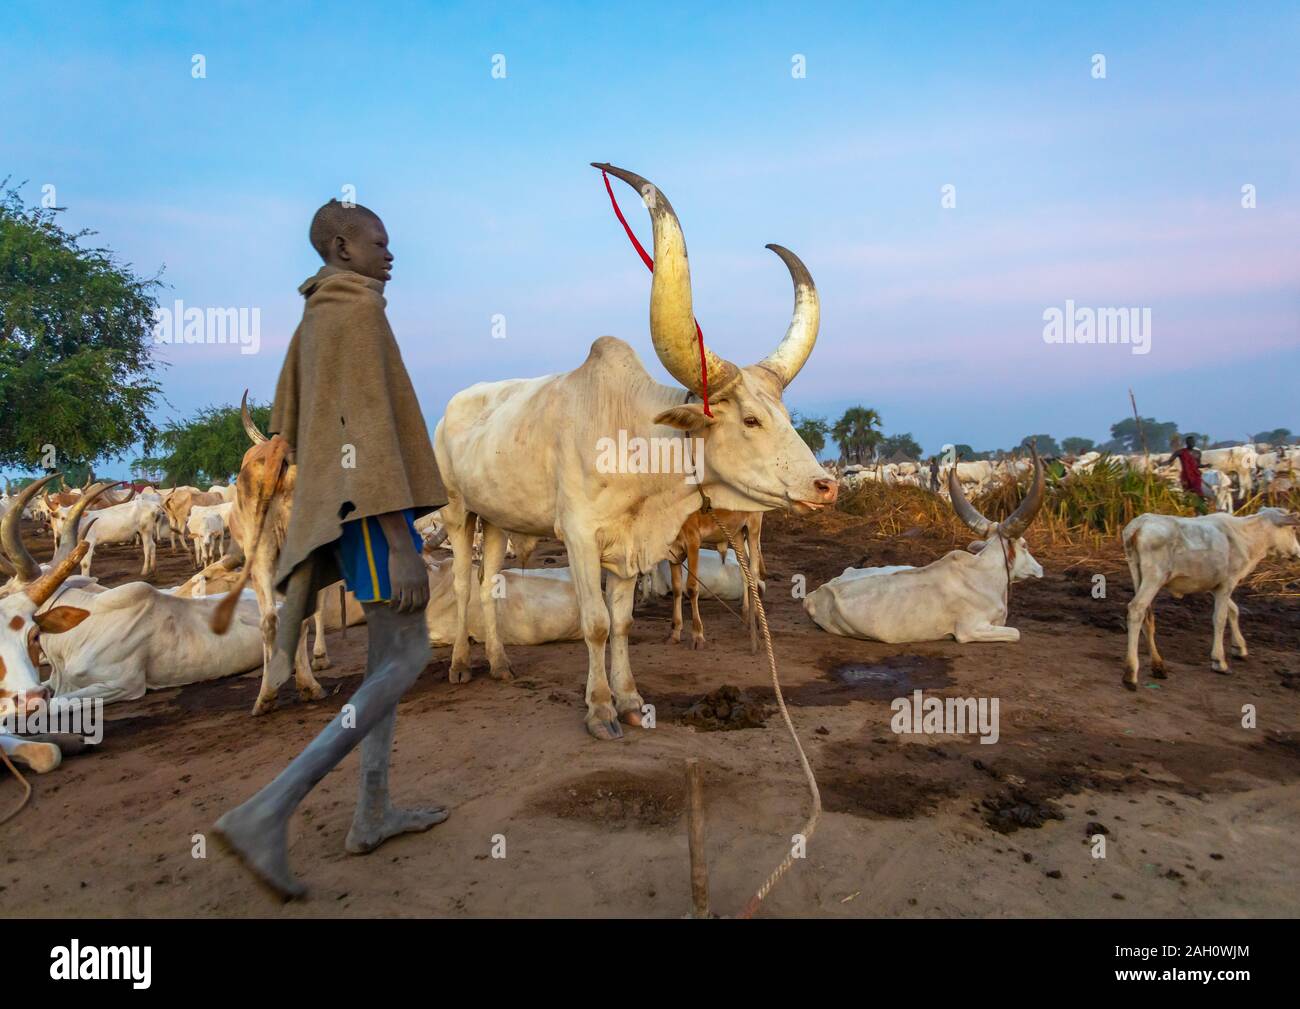 Mundari tribe boy taking care of the long horns cows in the camp, Central Equatoria, Terekeka, South Sudan Stock Photo